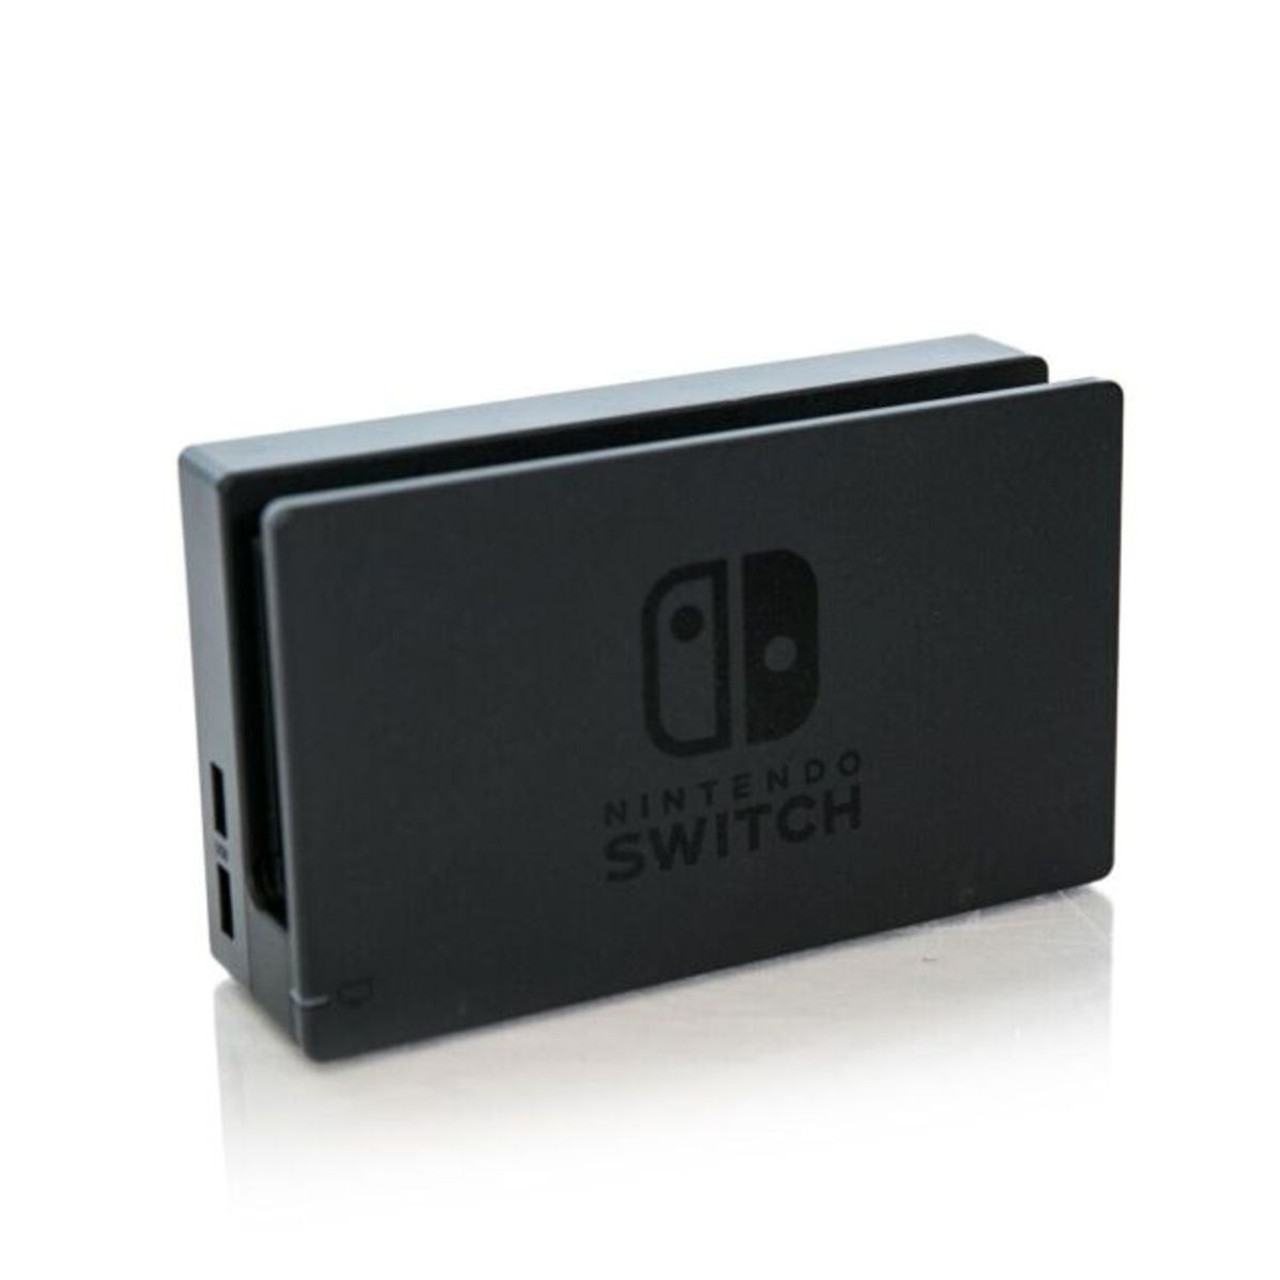 Nintendo Switch Dock Set with HDMI and AC Adapter product image